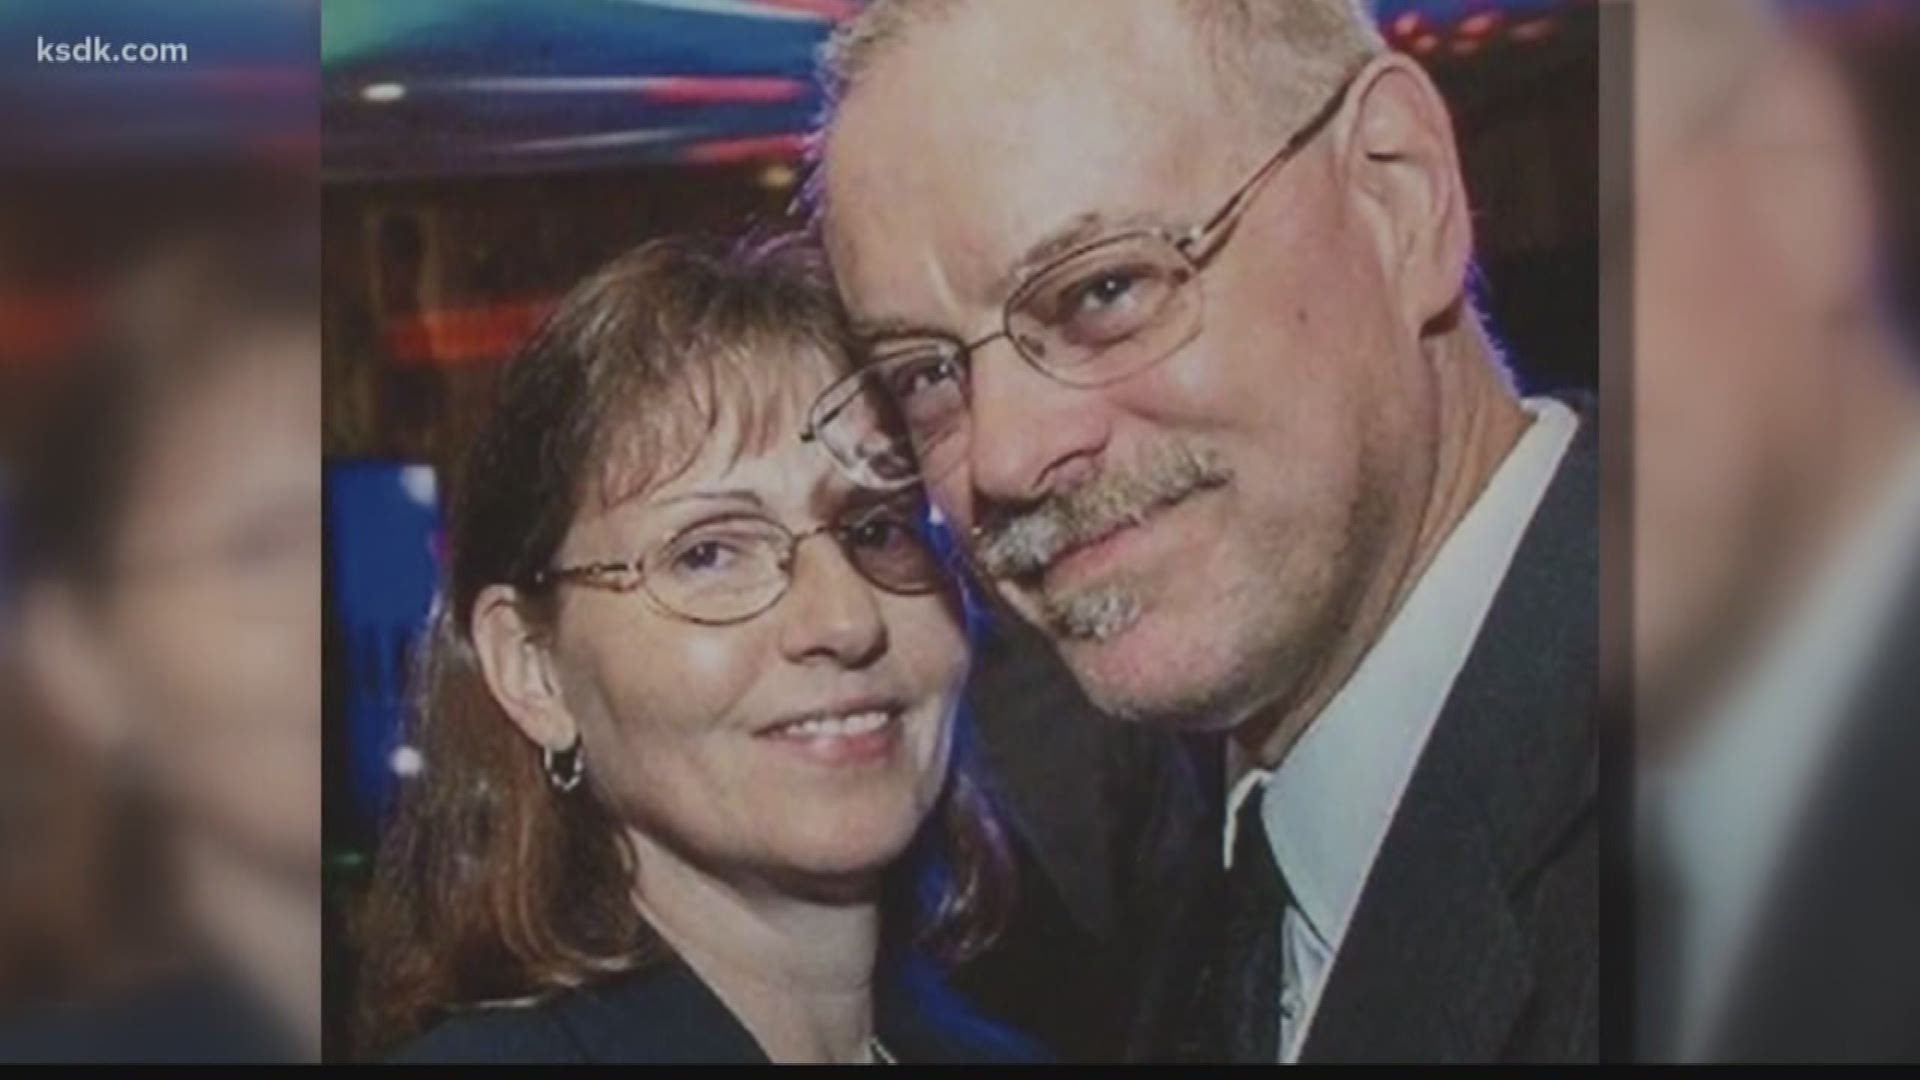 Jamie Schmidt was shot and killed in the shocking crime last November.  Now, for the first time her husband Gregg is speaking out.